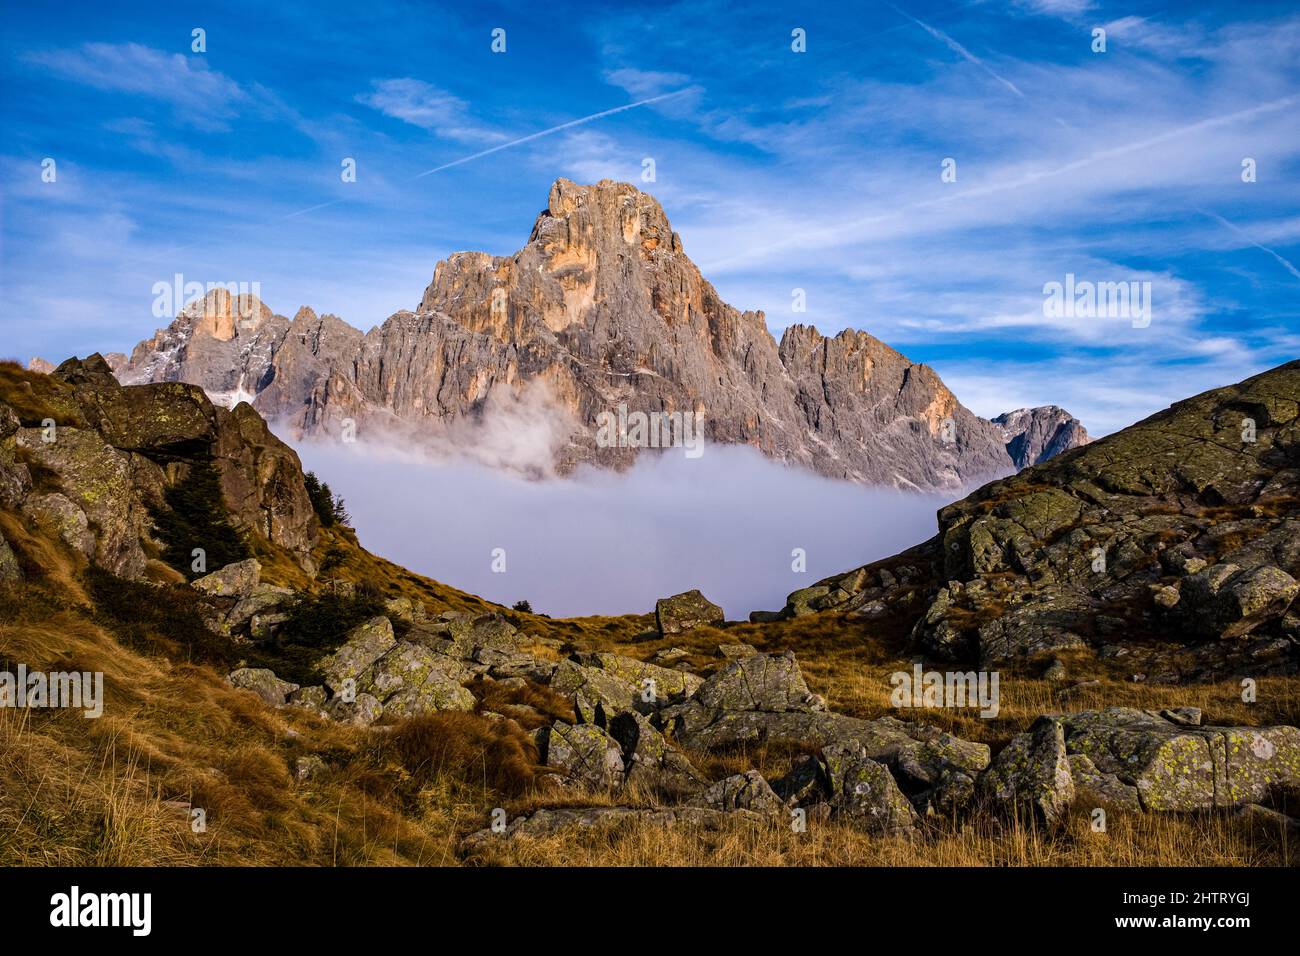 Summit and west face of Cimon della Pale, one of the main summits of the Pala group, standing out from the clouds, from above Rolle Pass in autumn. Stock Photo